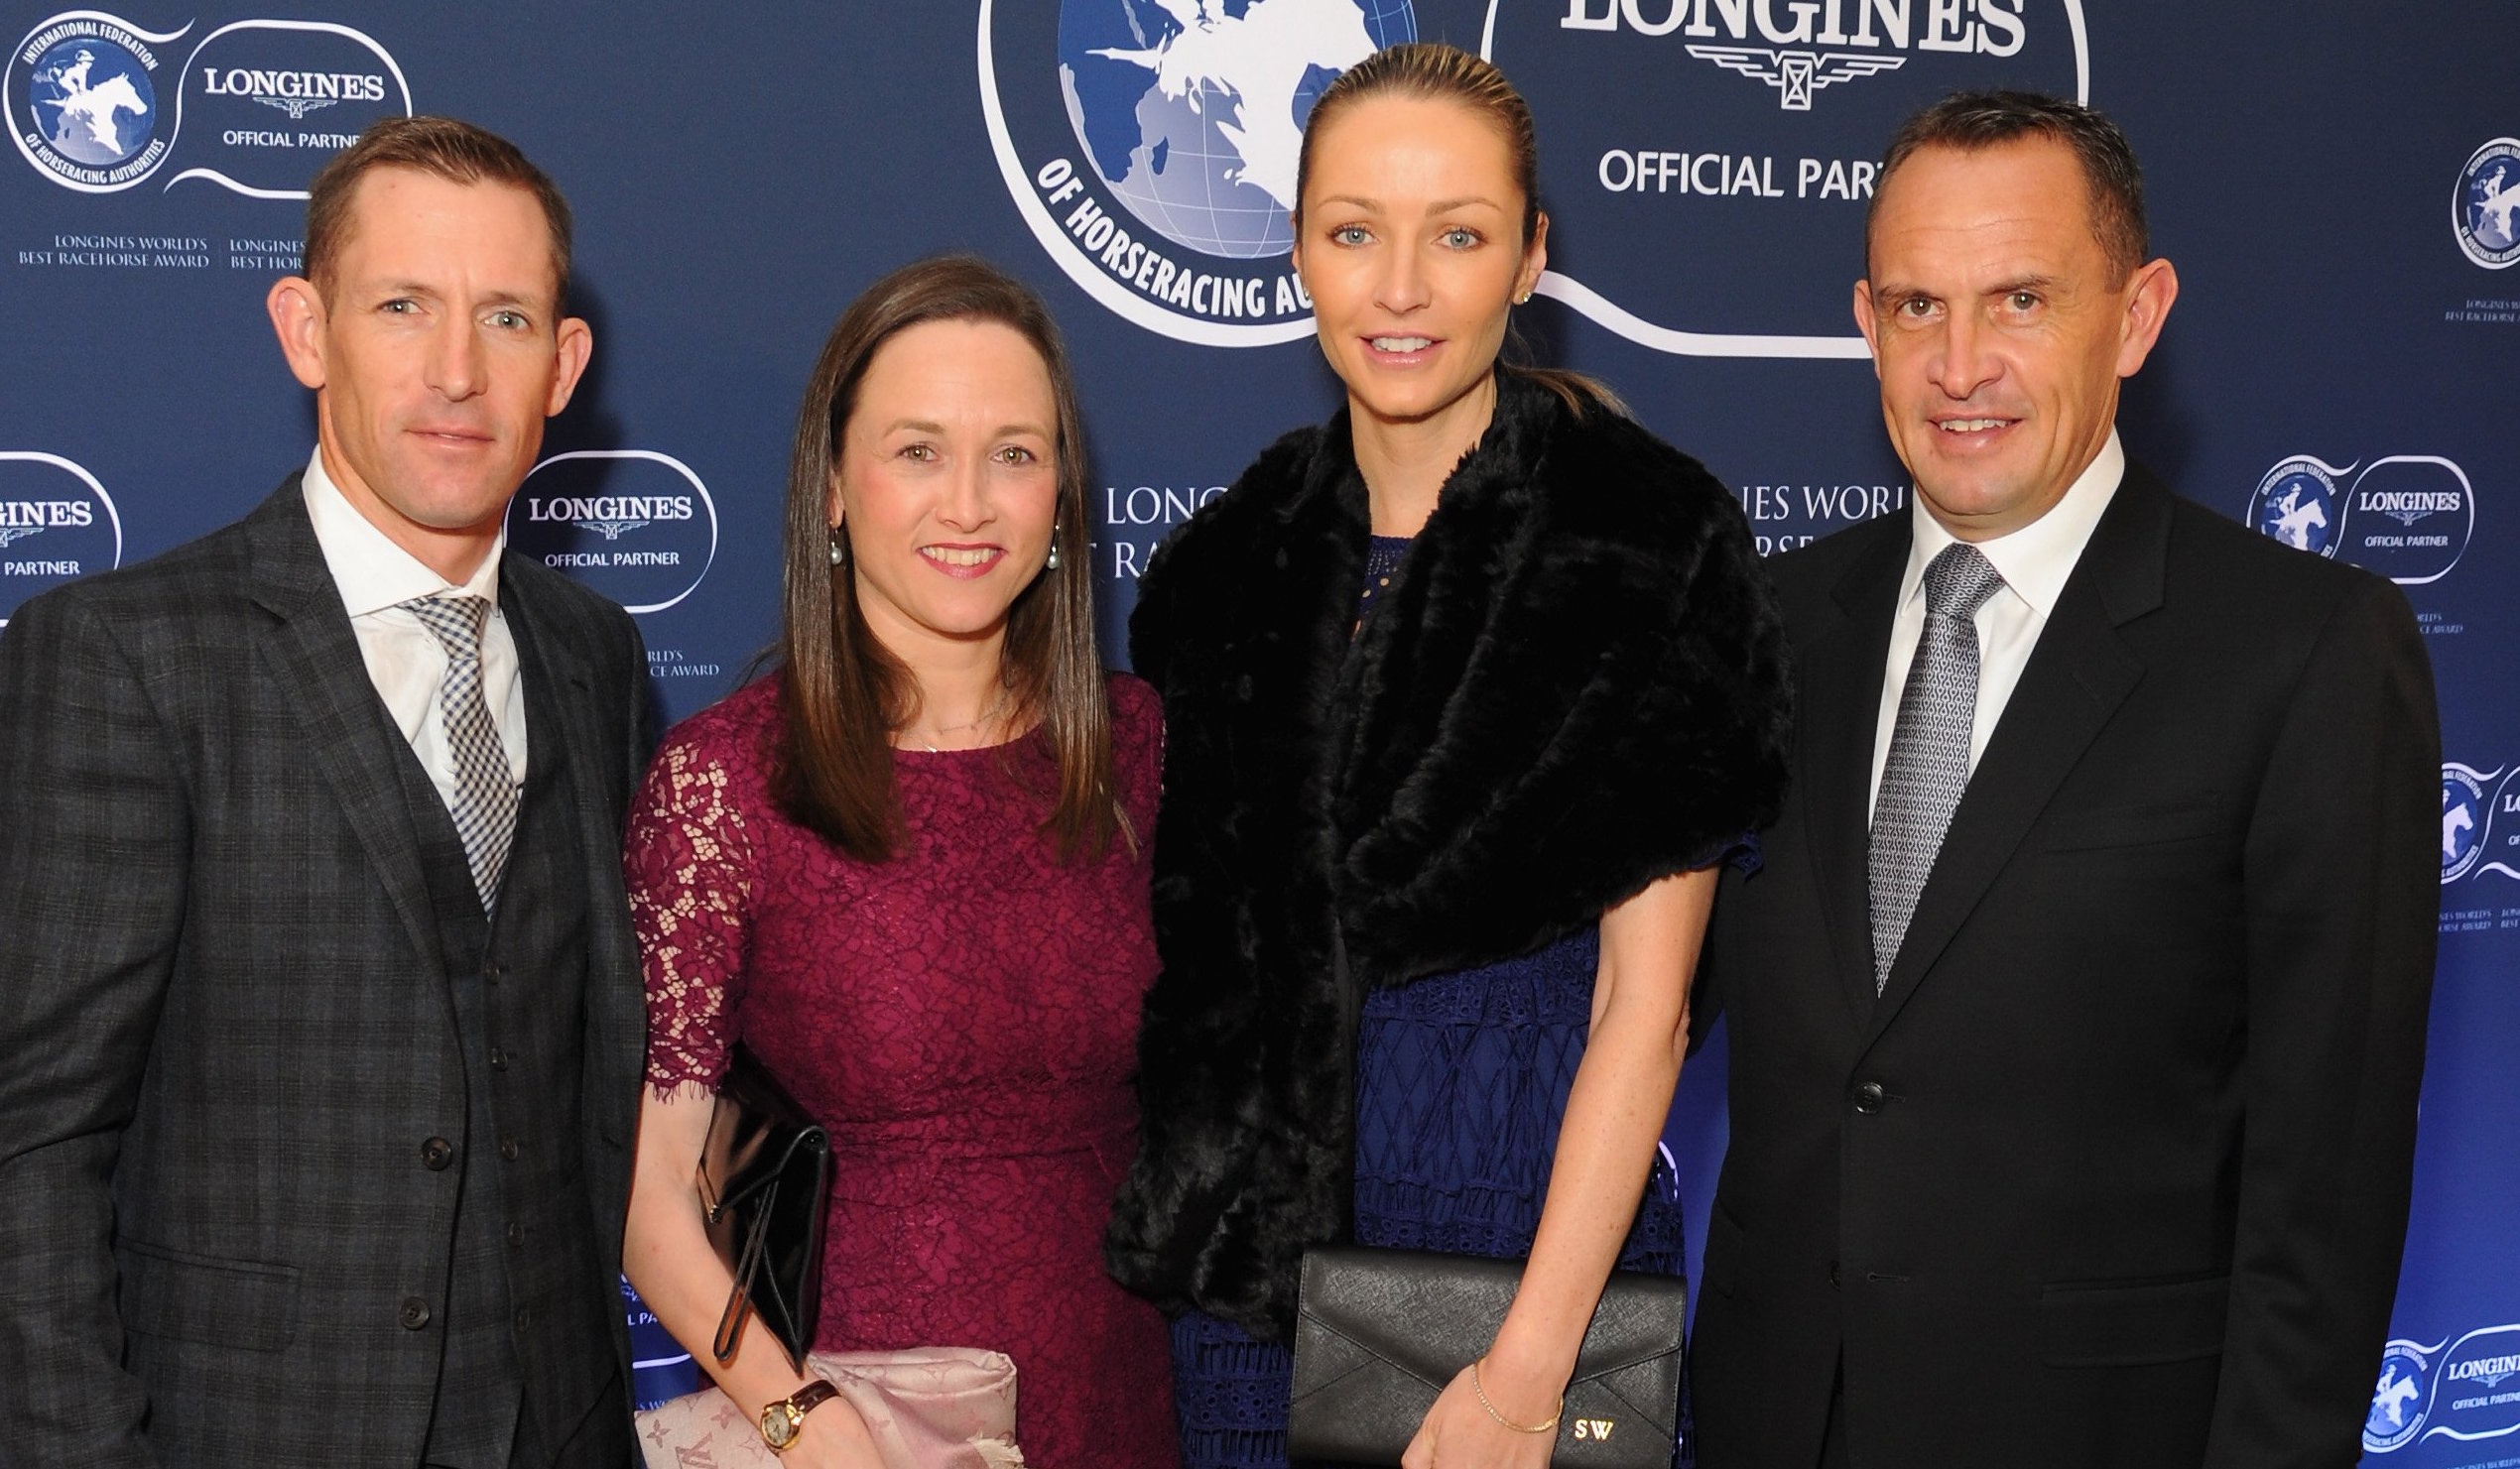 Hugh and Christine Bowman (left) with Chris and Stephanie Waller. Photo: Longines